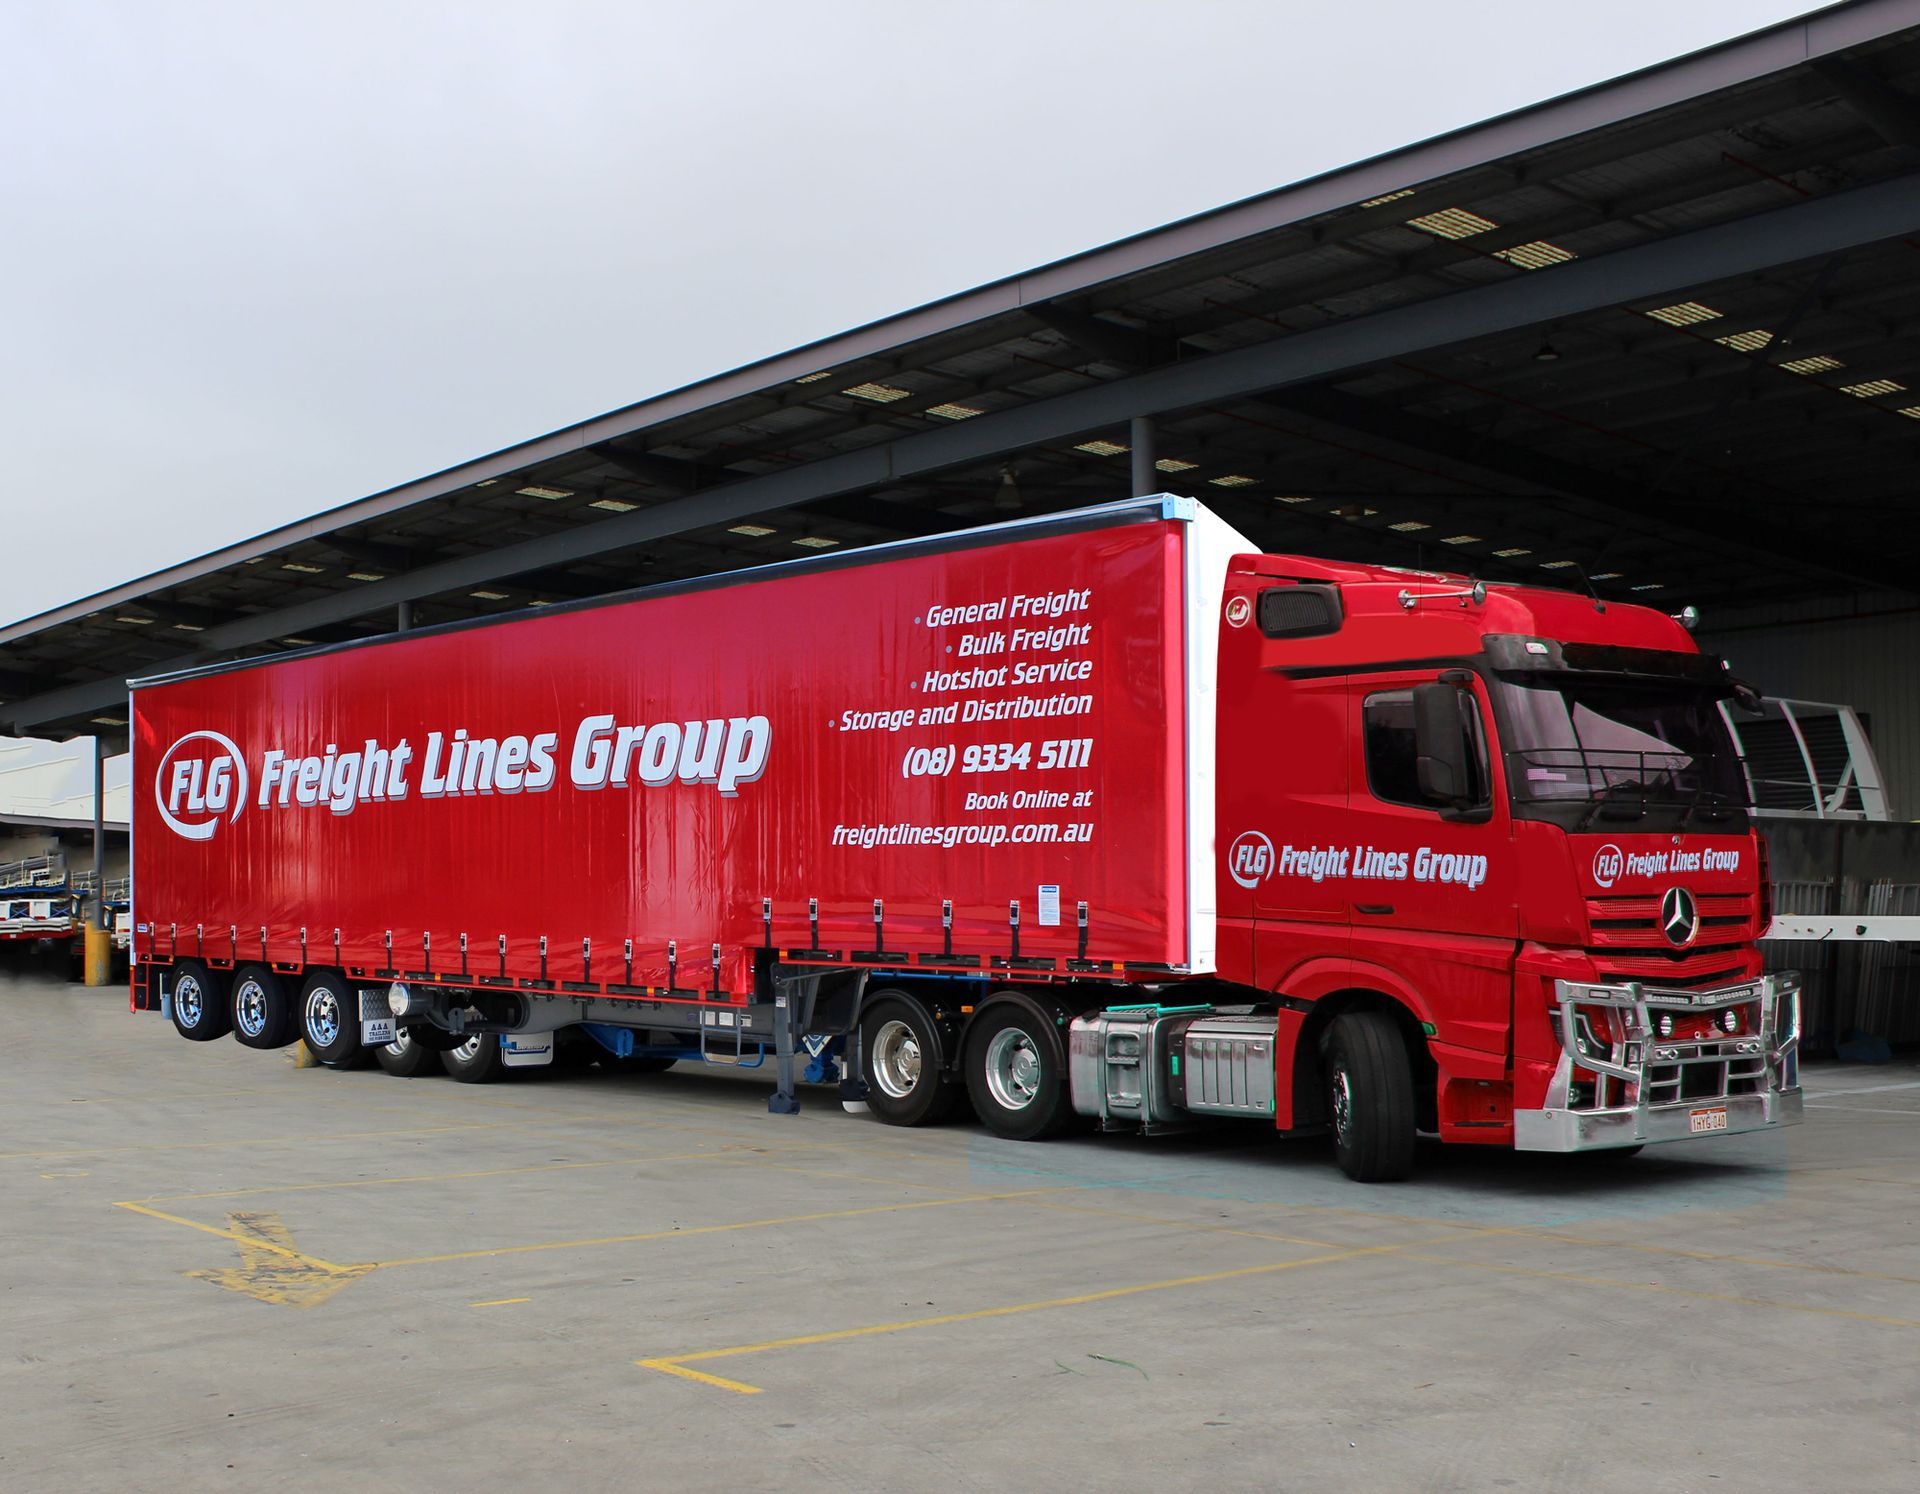 A red freight lines group truck is parked in a parking lot